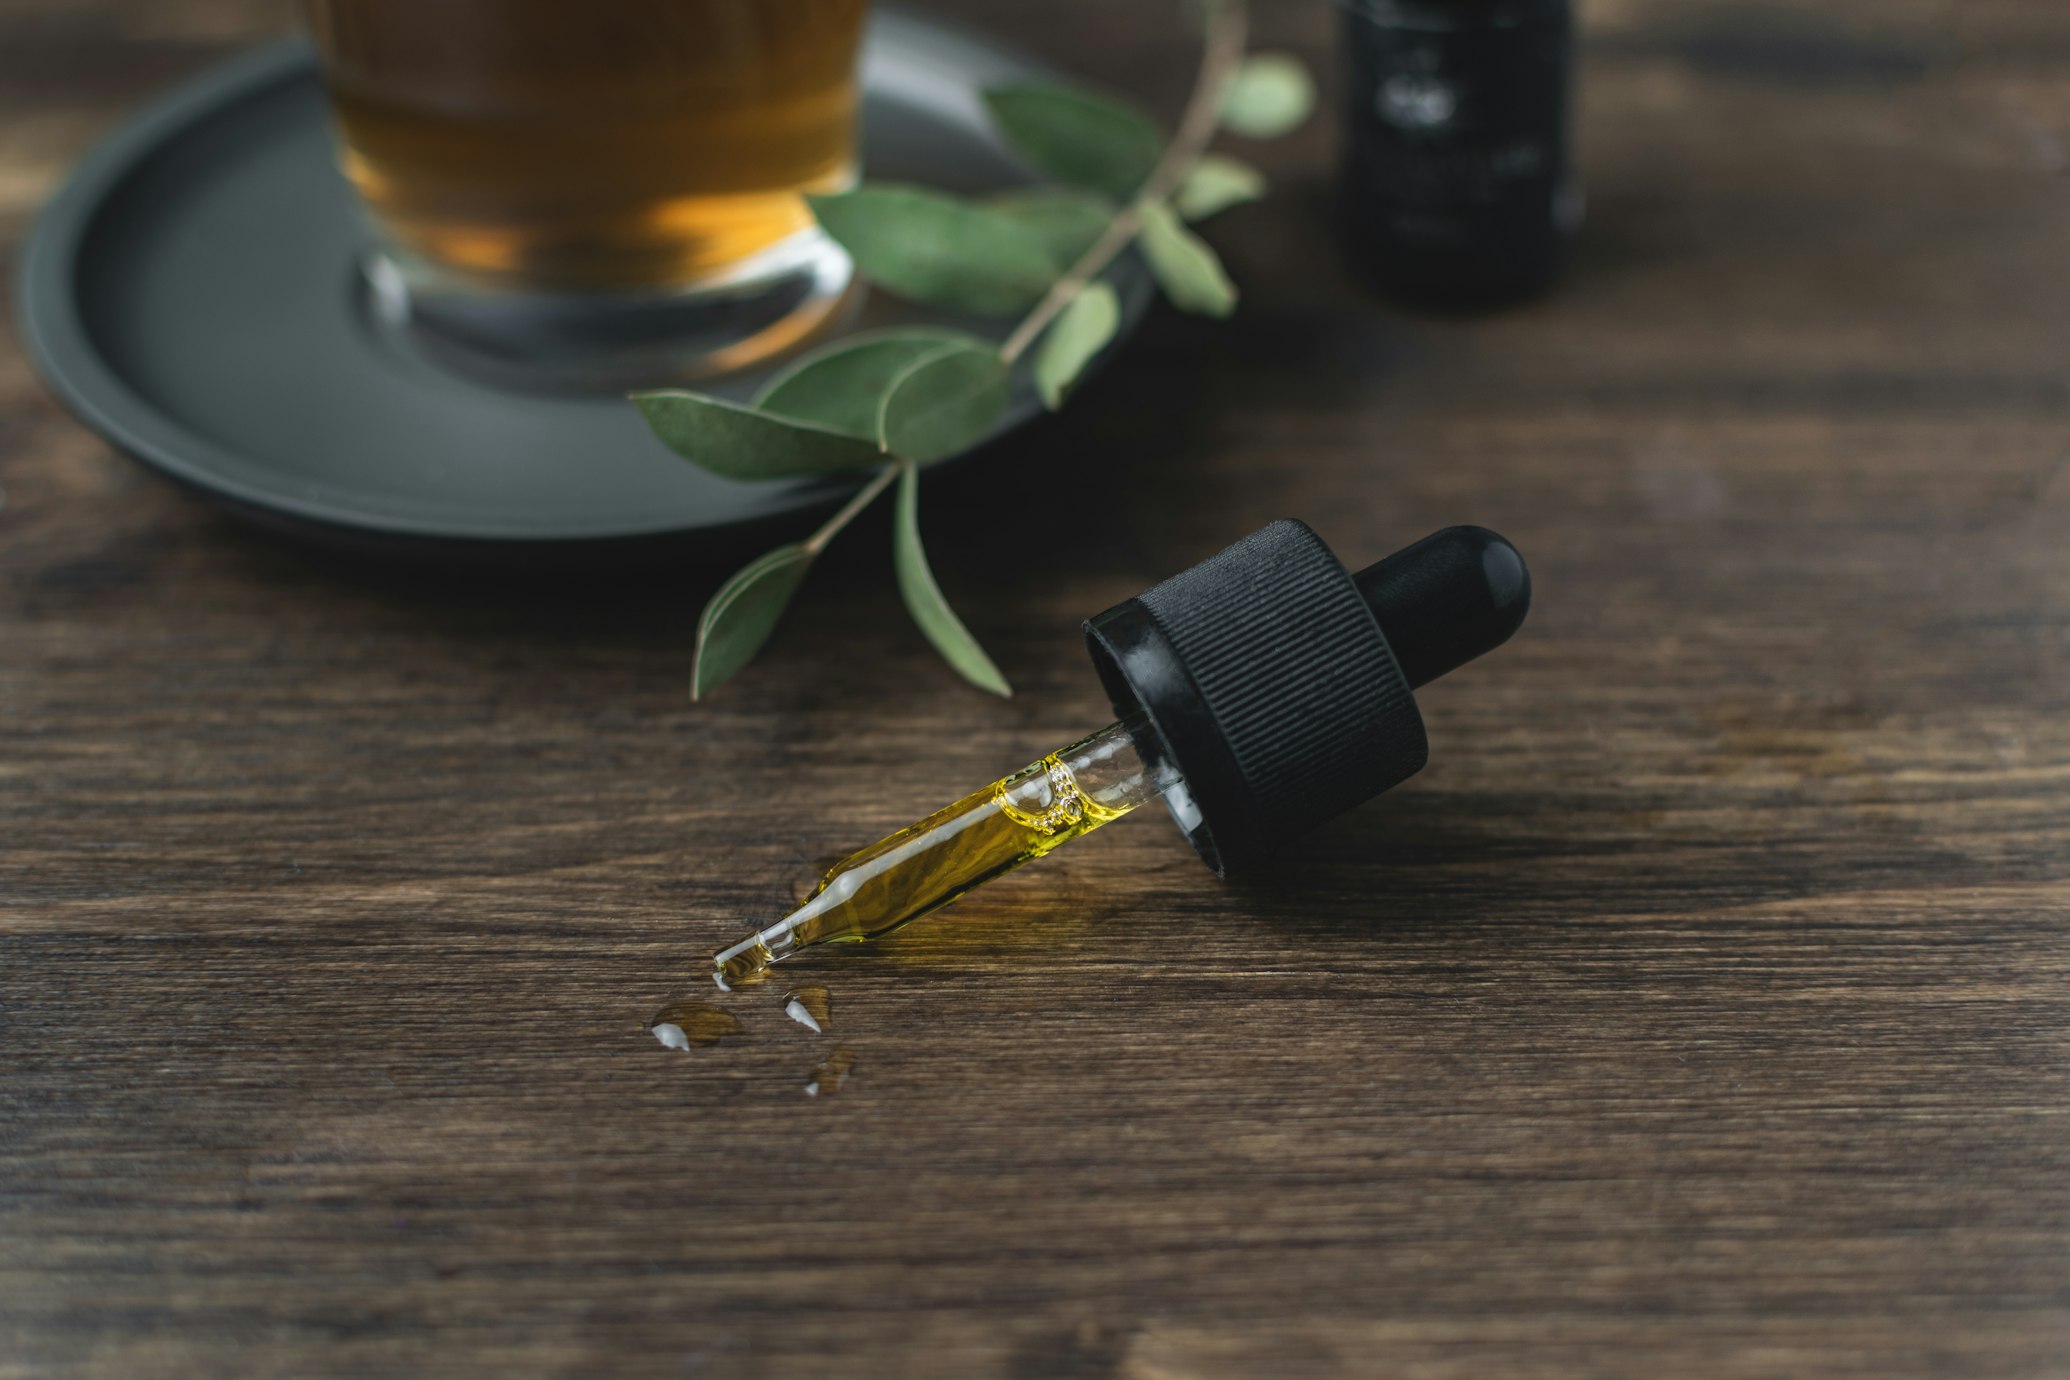 Vermont Pure Hemp CBD Oil reviews – Is it legit and safe to use?